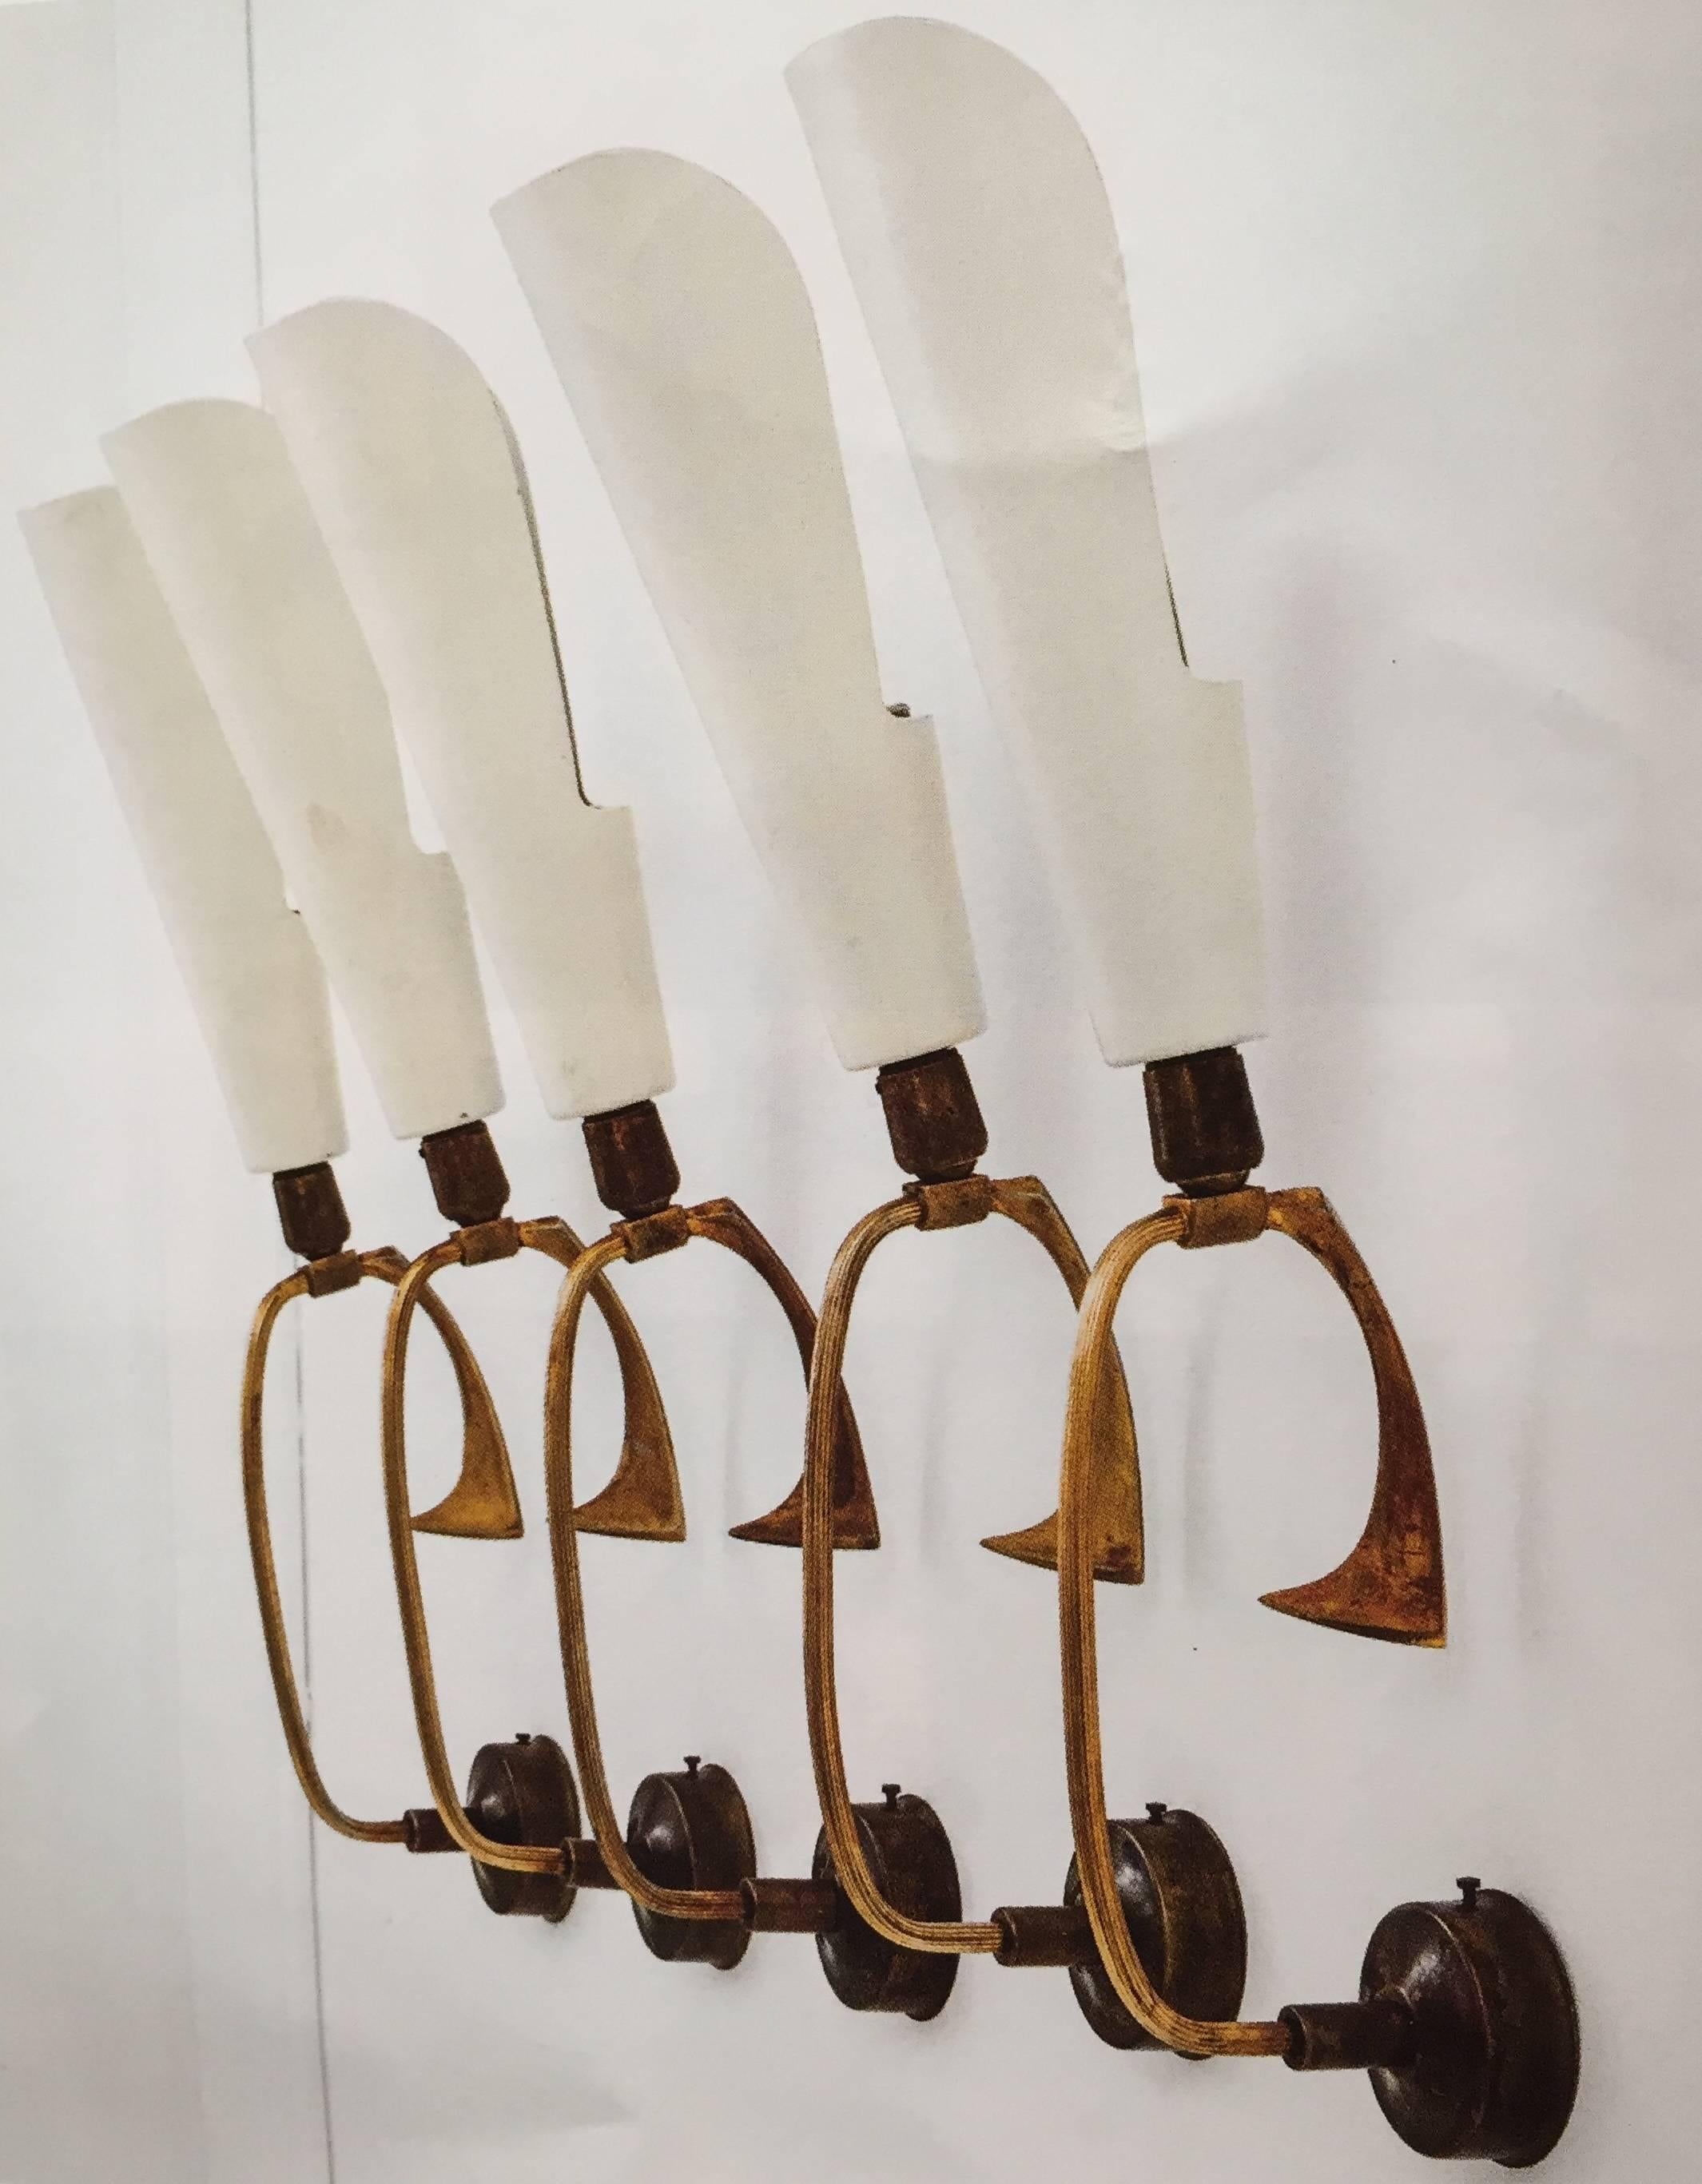 Arredoluce,
Series of five sconces,
Gold-plated brass and varnished aluminum,
Production Arredoluce, production label stuck,
circa 1950, Italy.
Height: 50 cm, width 10 cm, depth: 8 cm.